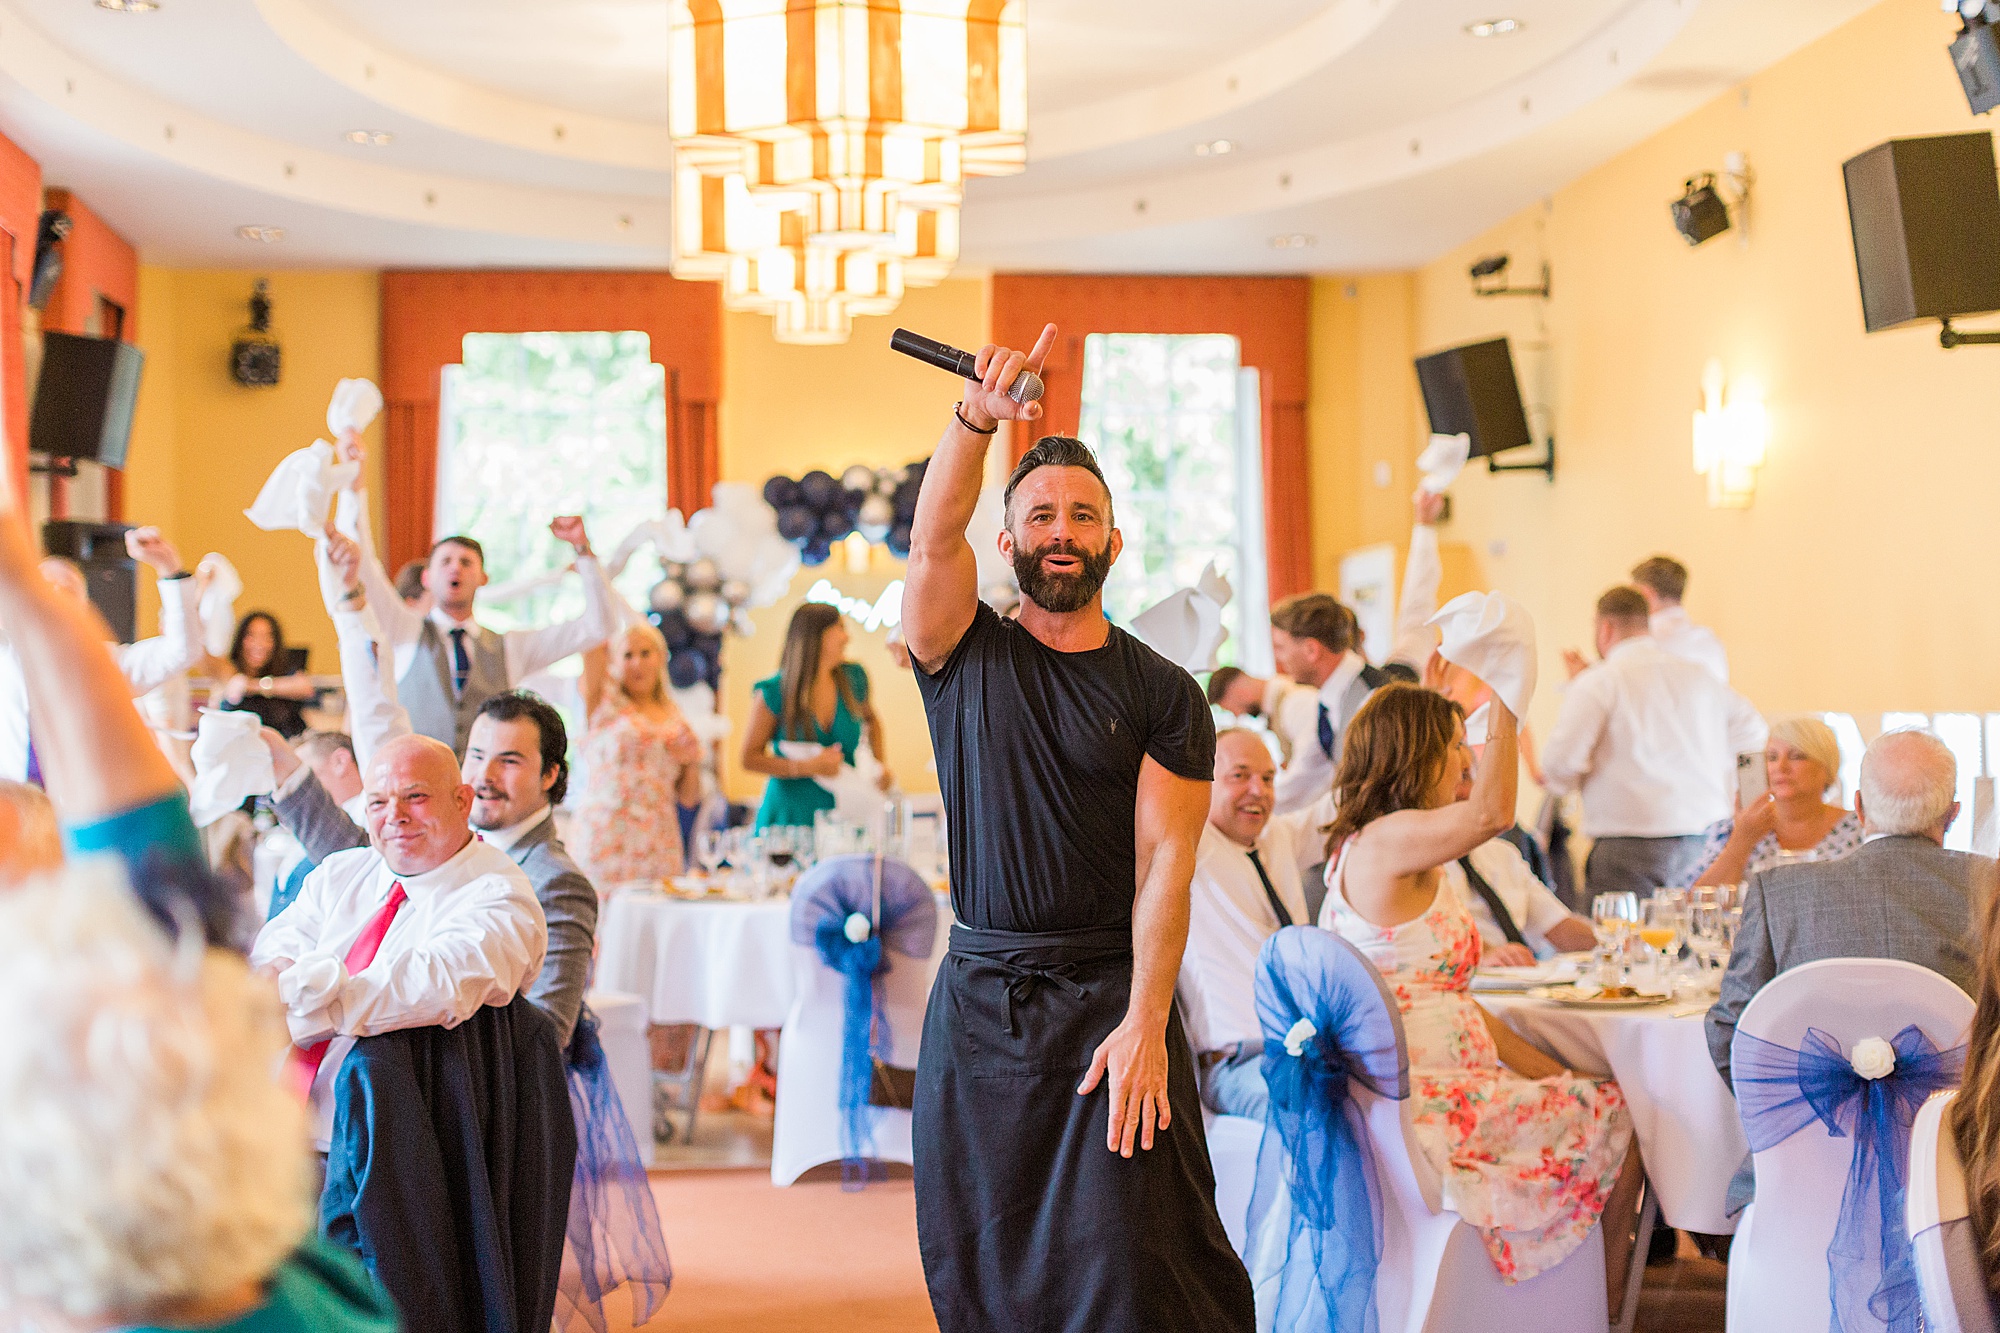  singer waiter with his hand up in the air performing to wedding guests with guests in the background singing and cheering 